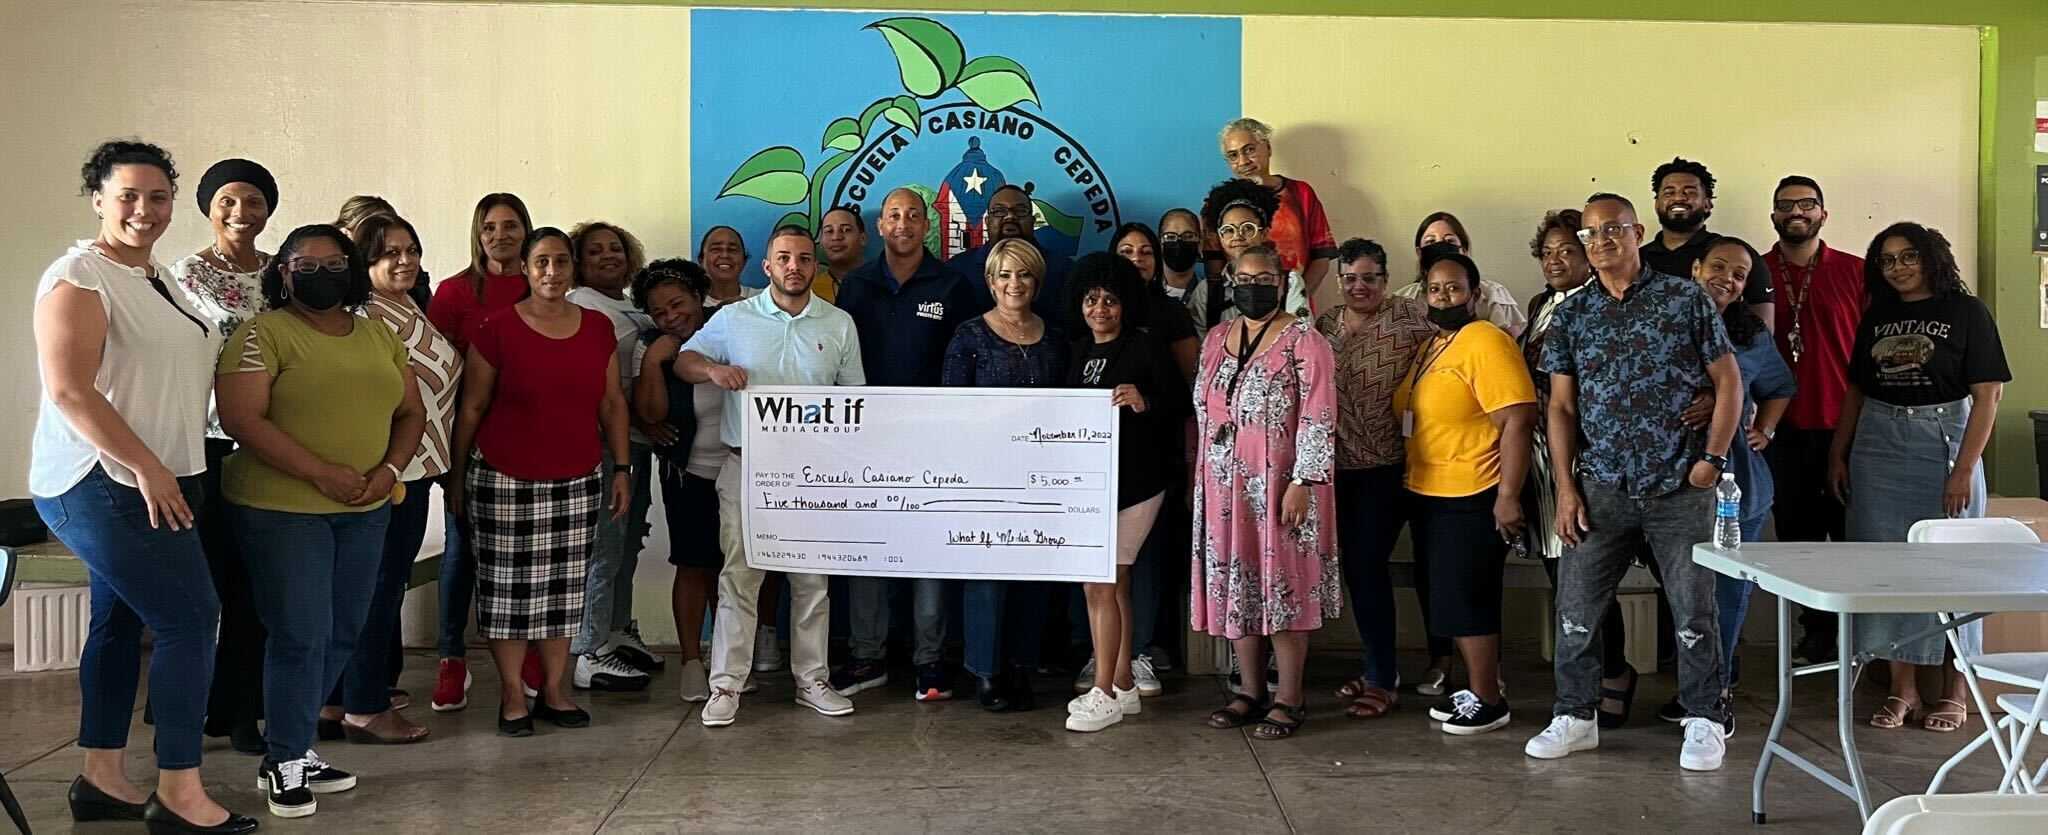 In addition to a $5,000 donation made directly to Escuela Casiano Cepeda by What If Media Group, we were able to donate all of the remaining supplies, which included nearly 20 gallons of paint, paint brushes, a printer, and a projector screen.